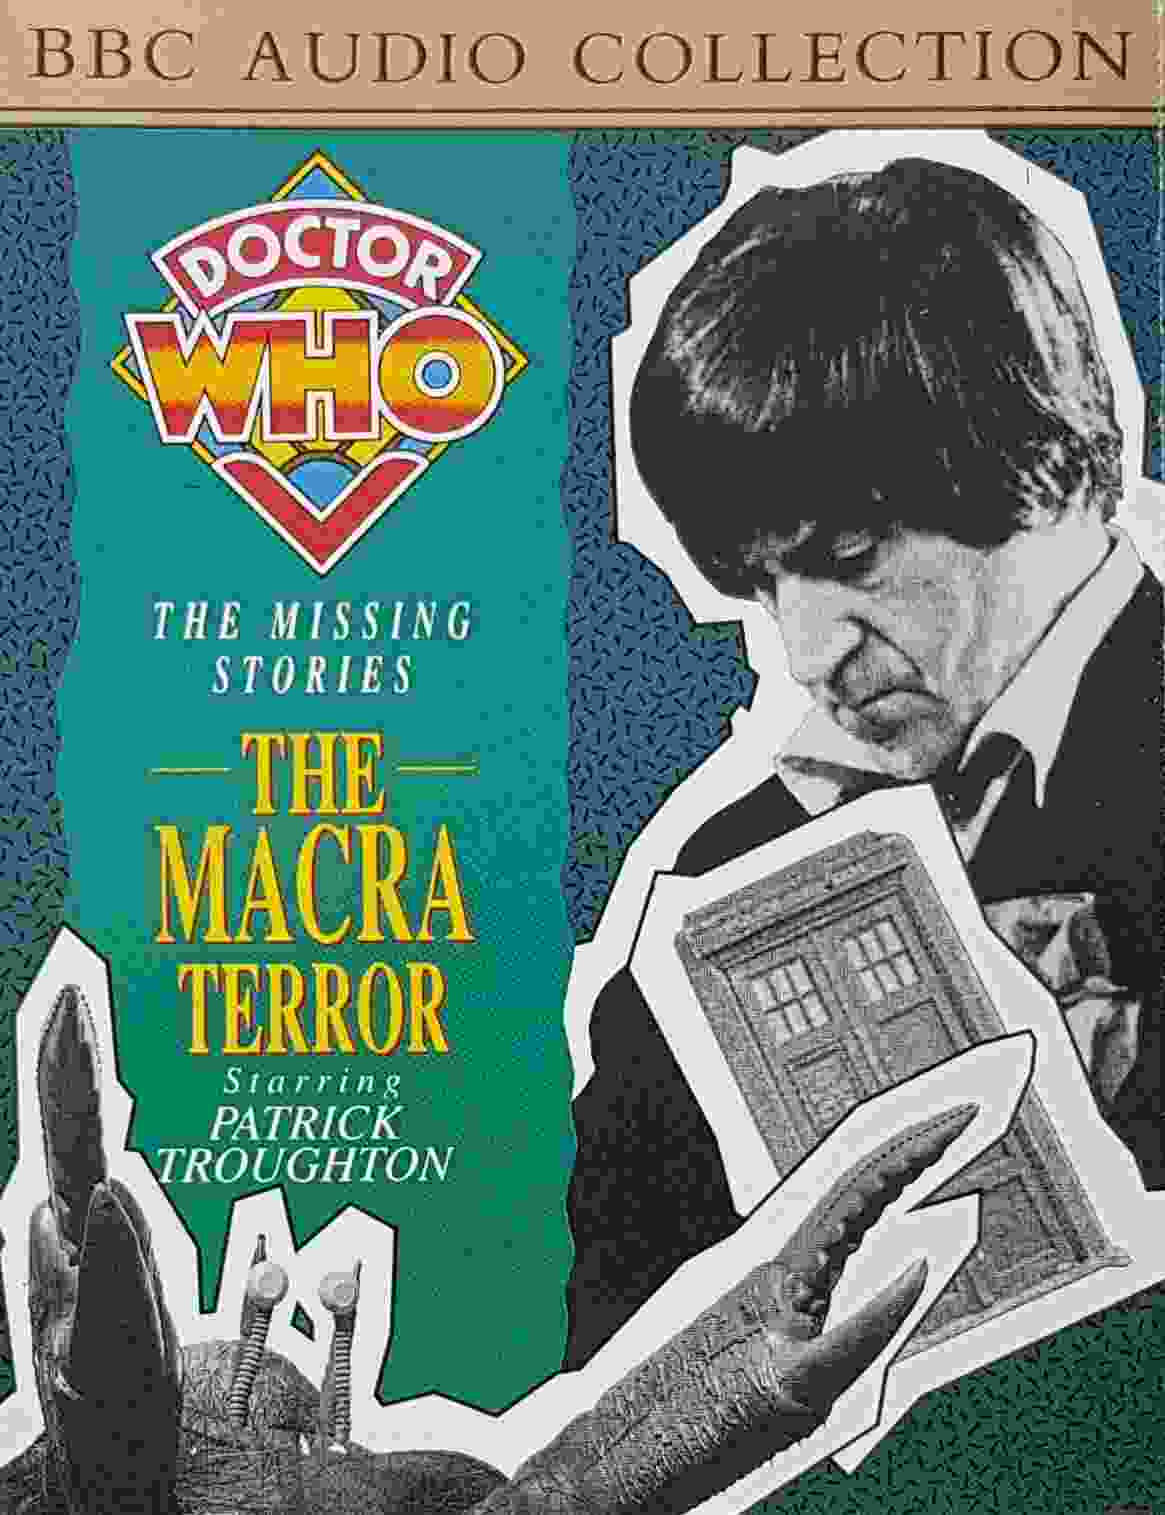 Picture of ZBBC 1342 Doctor Who - The Macra terror by artist Ian Stuart Black from the BBC cassettes - Records and Tapes library